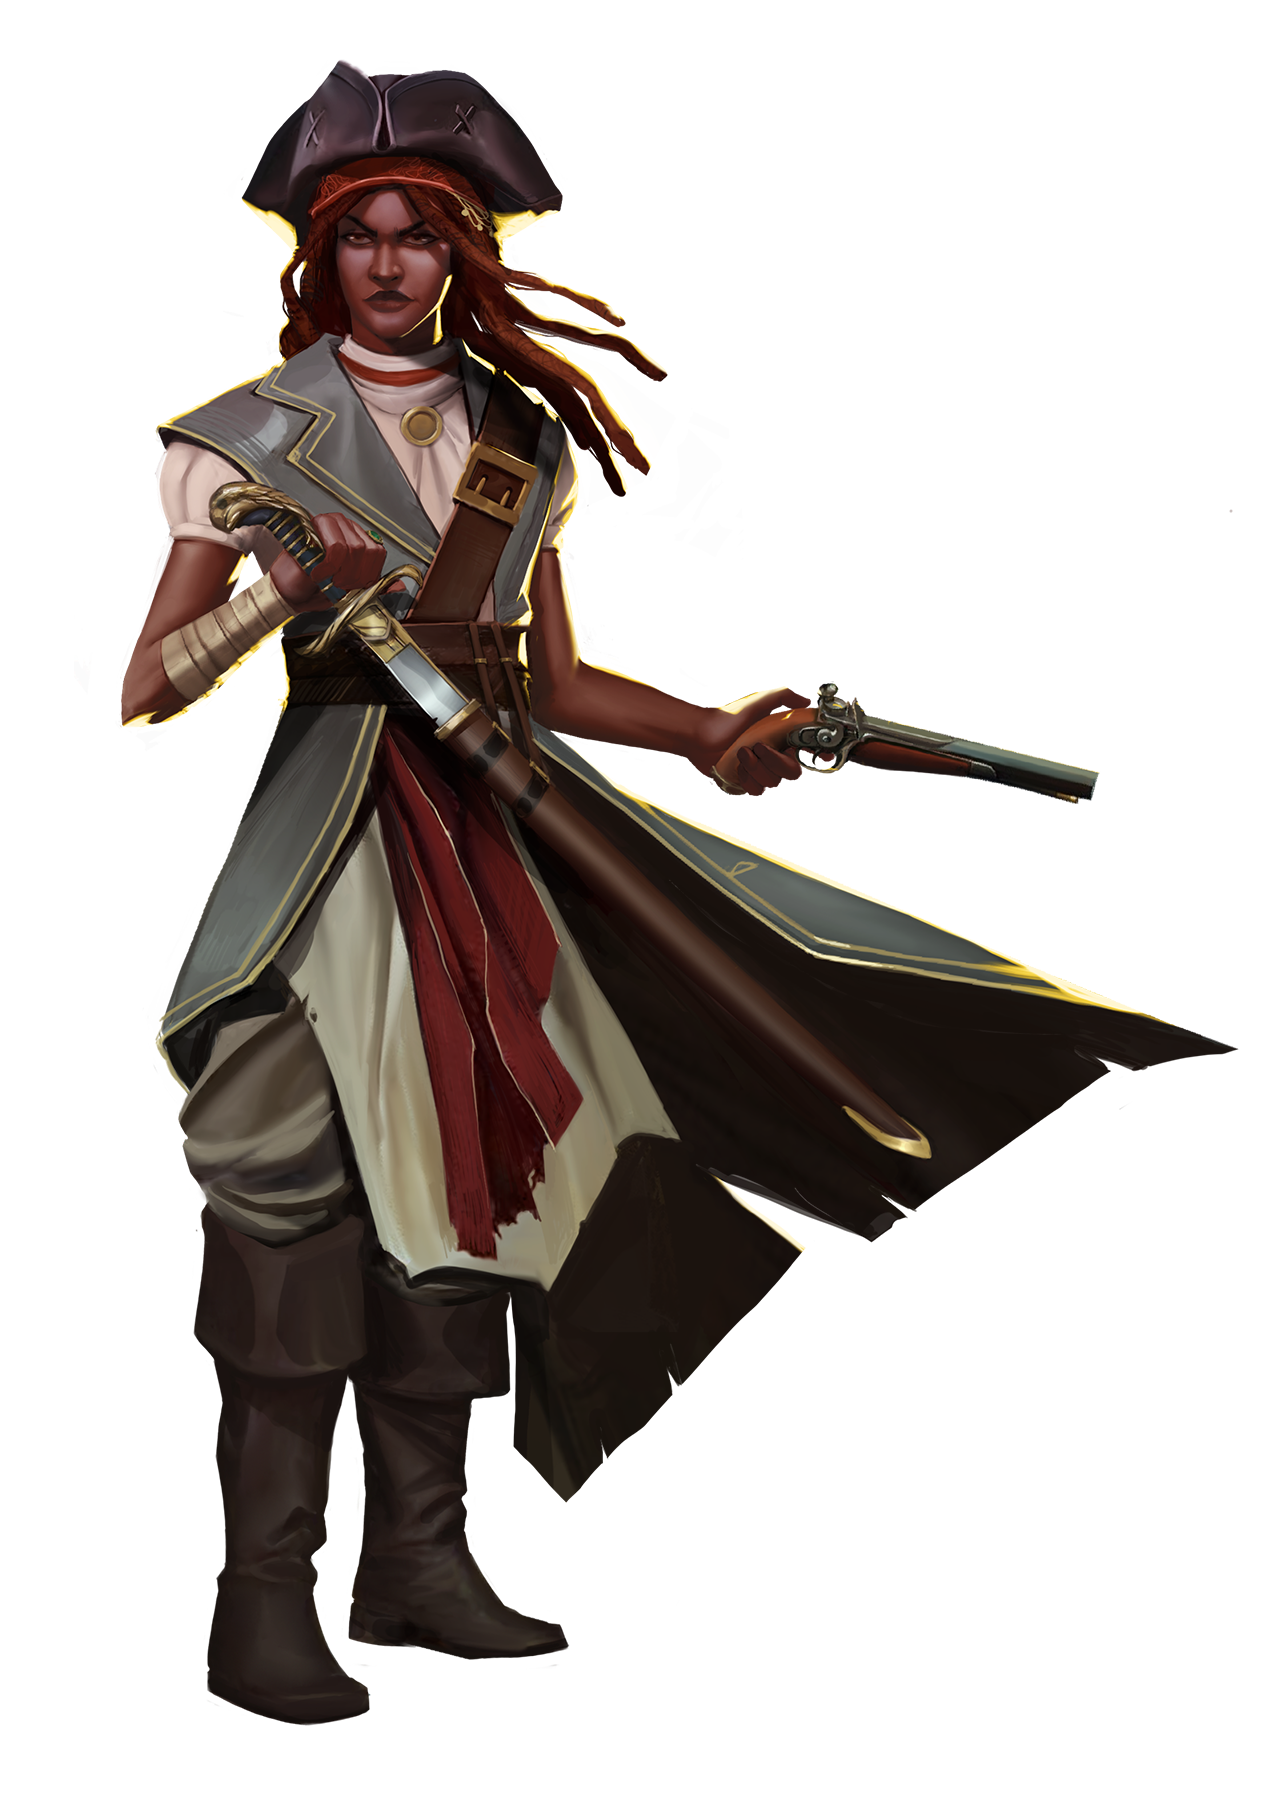 A dark skinned pirate wielding a pistol in one hand and a sword in the other